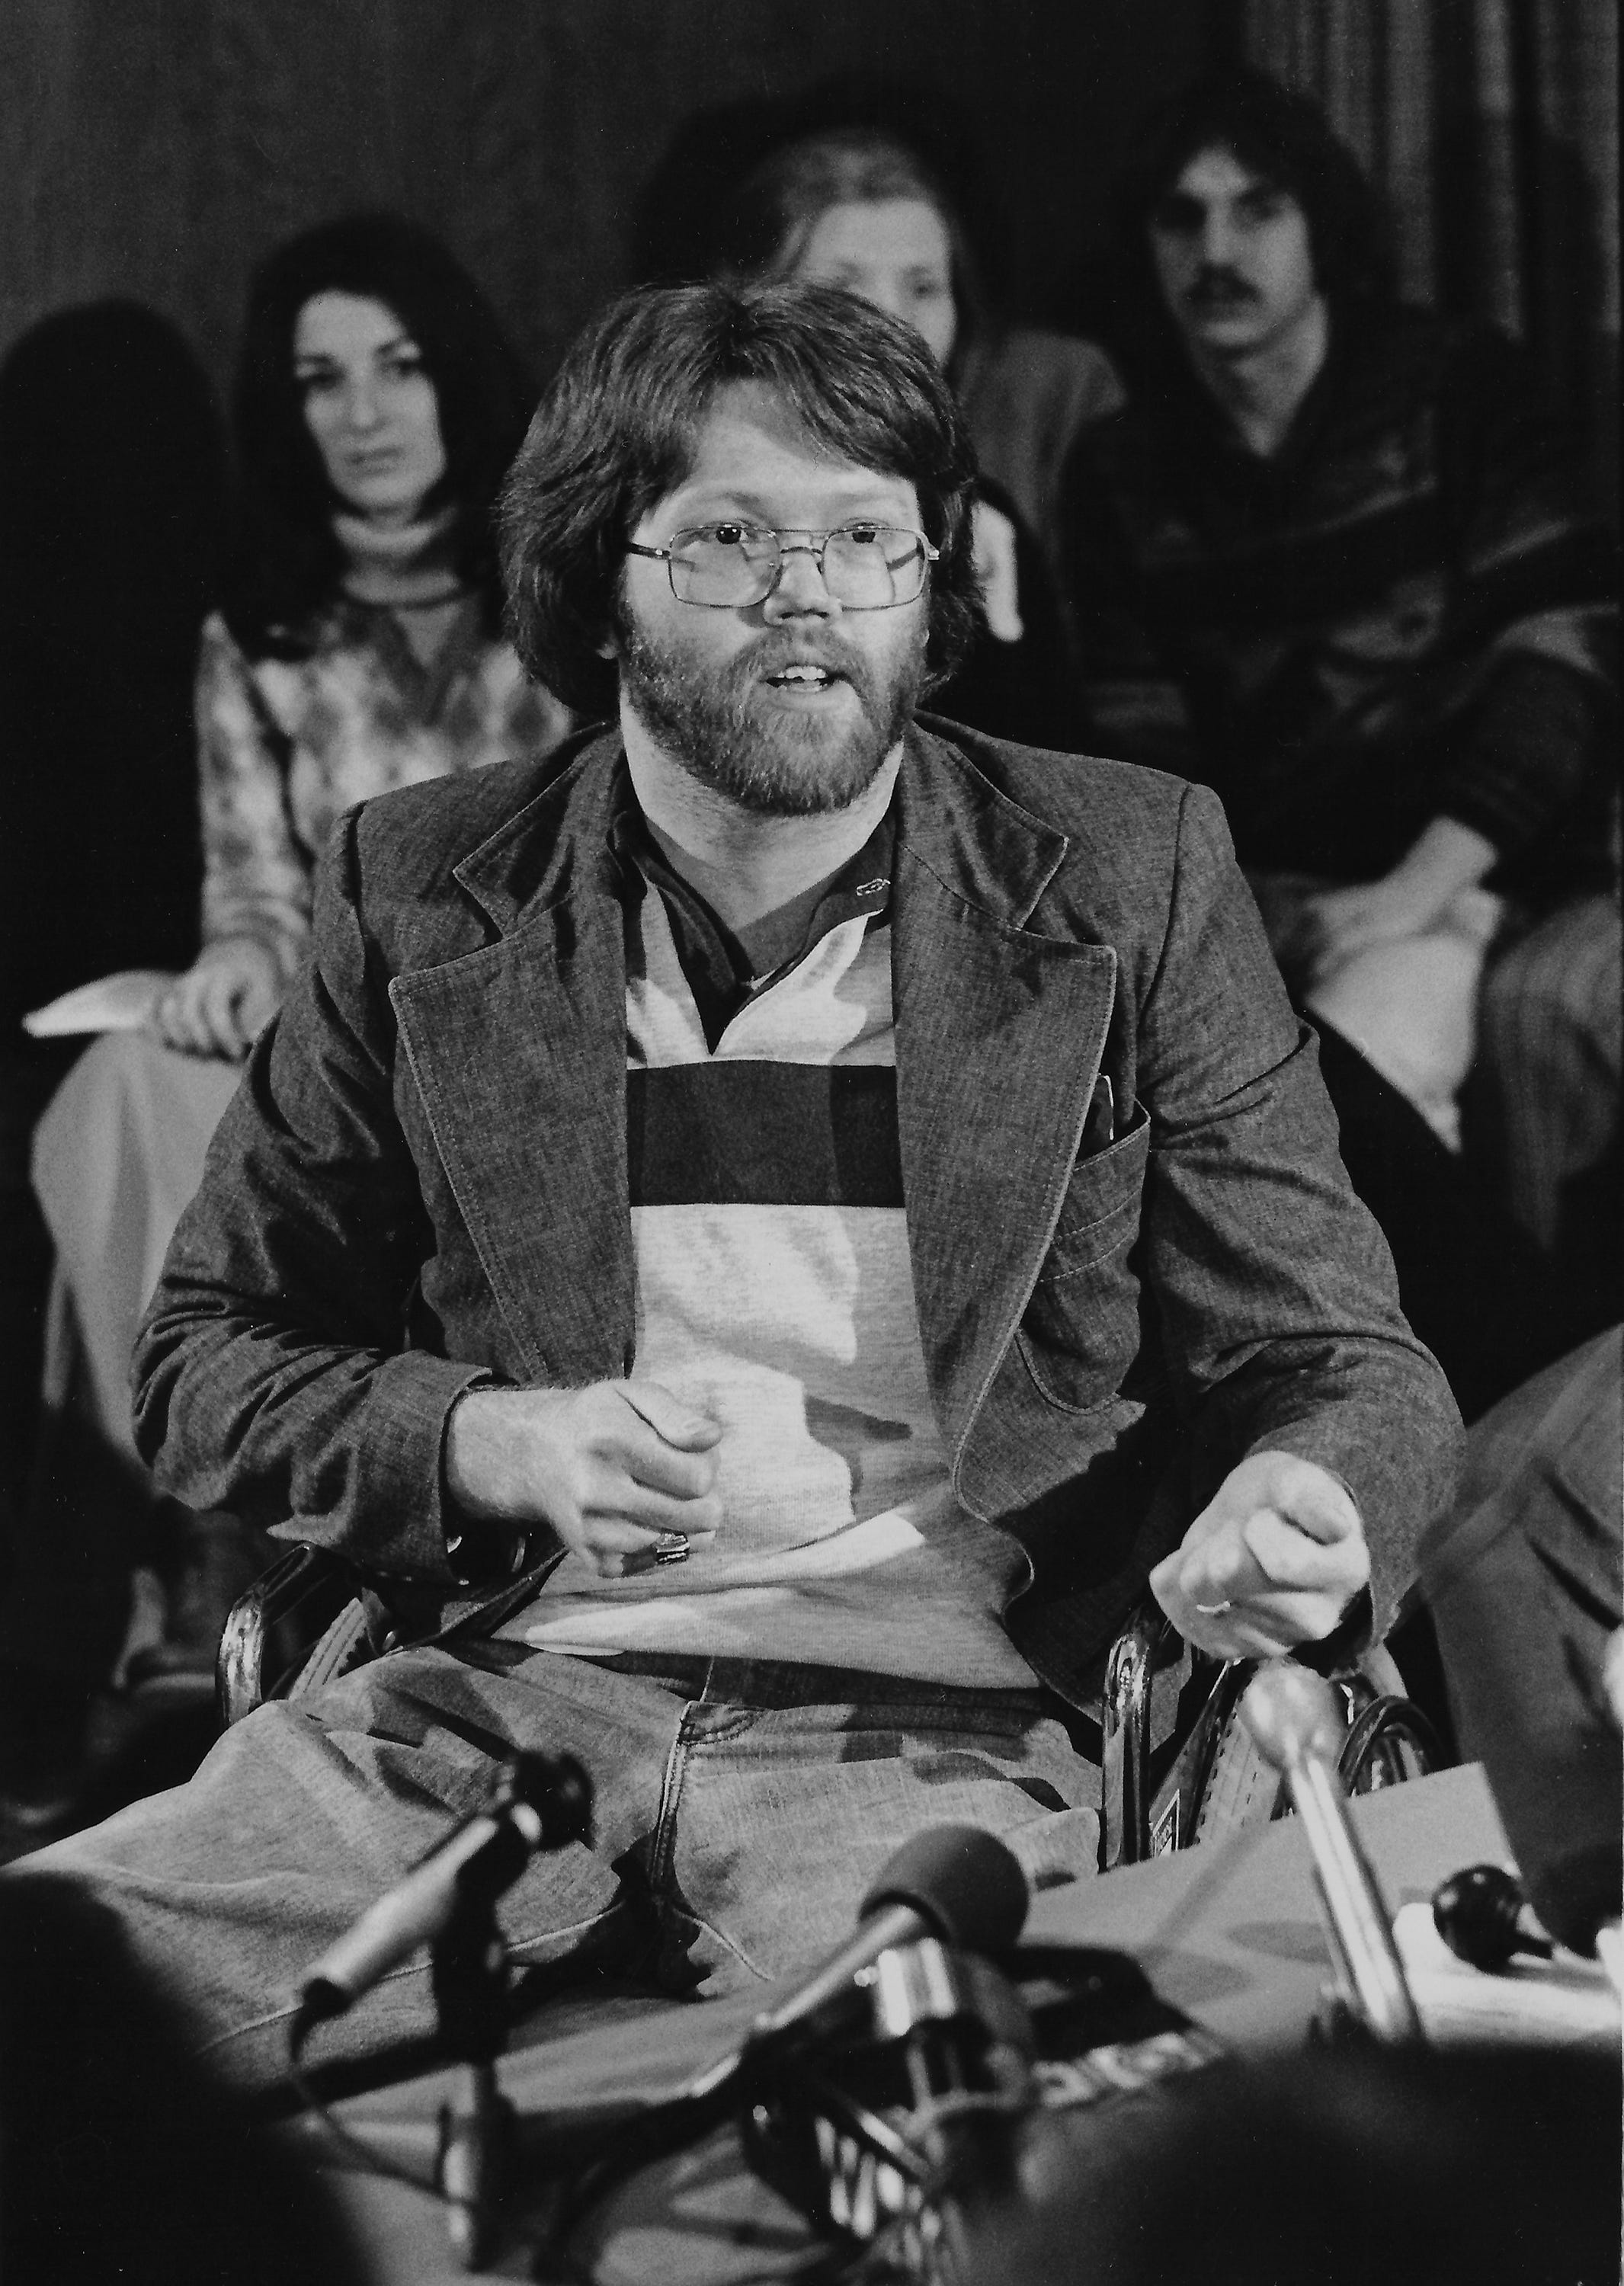 Dean Kahler, who was shot in the back and paralyzed by National Guardsmen at Kent State on May 4, 1970, speaks at a press conference following the $675,000 settlement of a civil lawsuit on Jan. 4, 1979. In the background at left is Roseanne “Chic” Canfora, who was a witness to the shootings and whose brother, Alan, was one of the nine students injured that day. [Ott Gangl/AKRON BEACON JOURNAL]